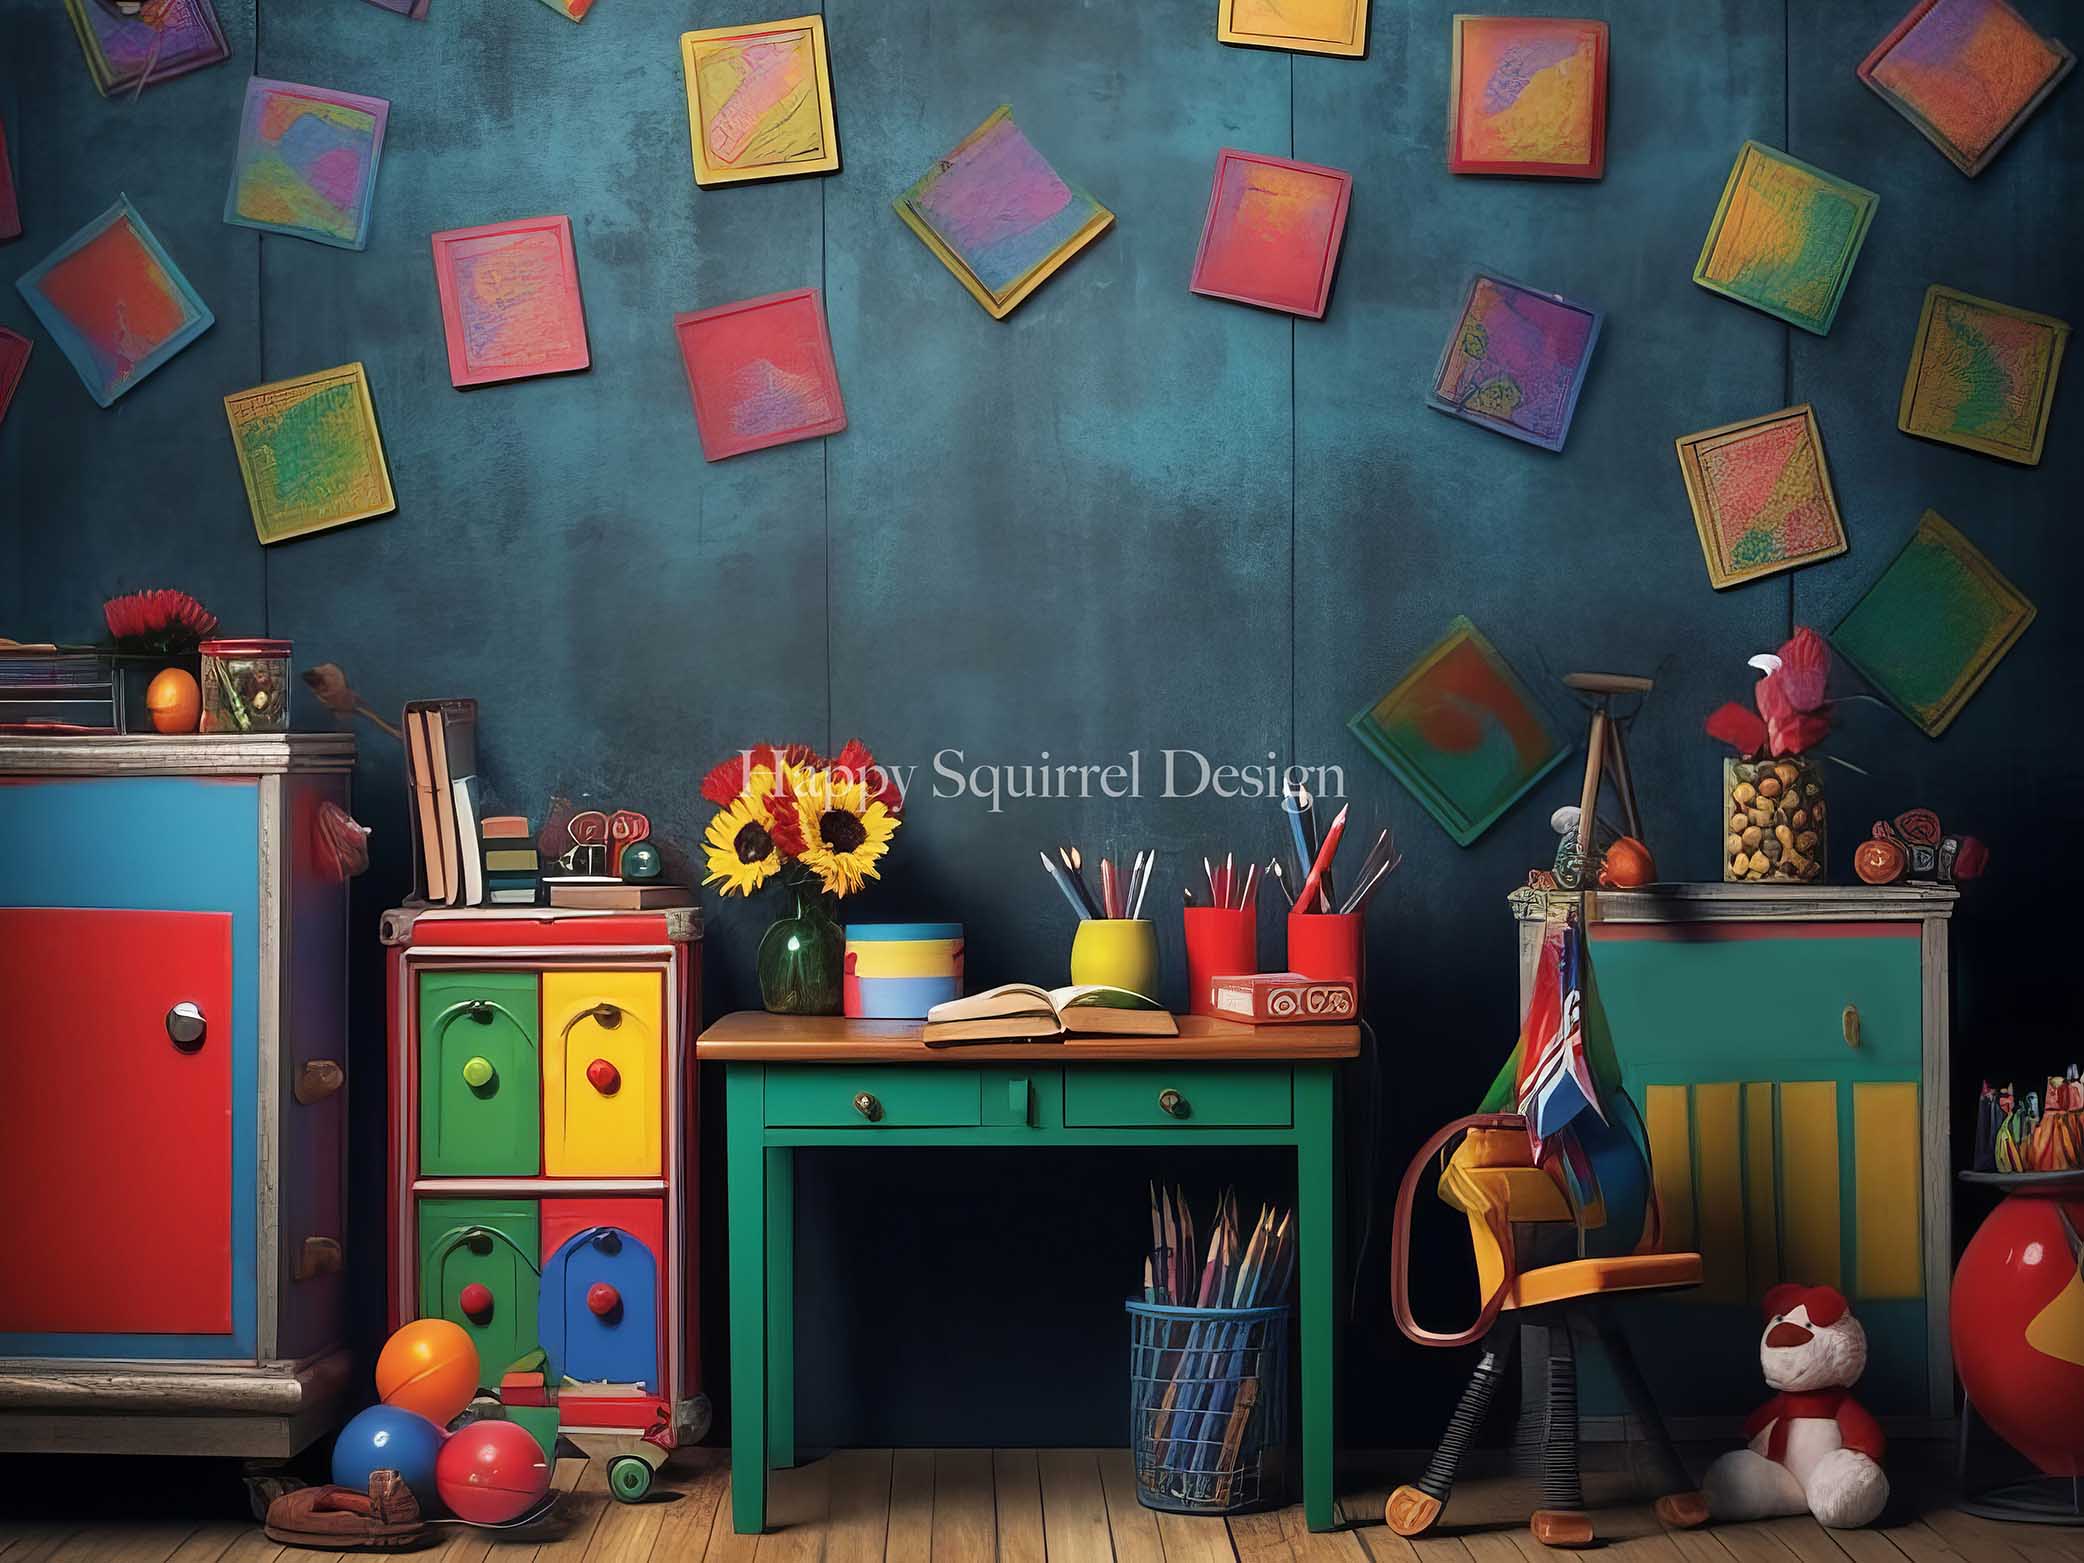 Kate Back to School Colorful Classroom Backdrop Designed by Happy Squirrel Design